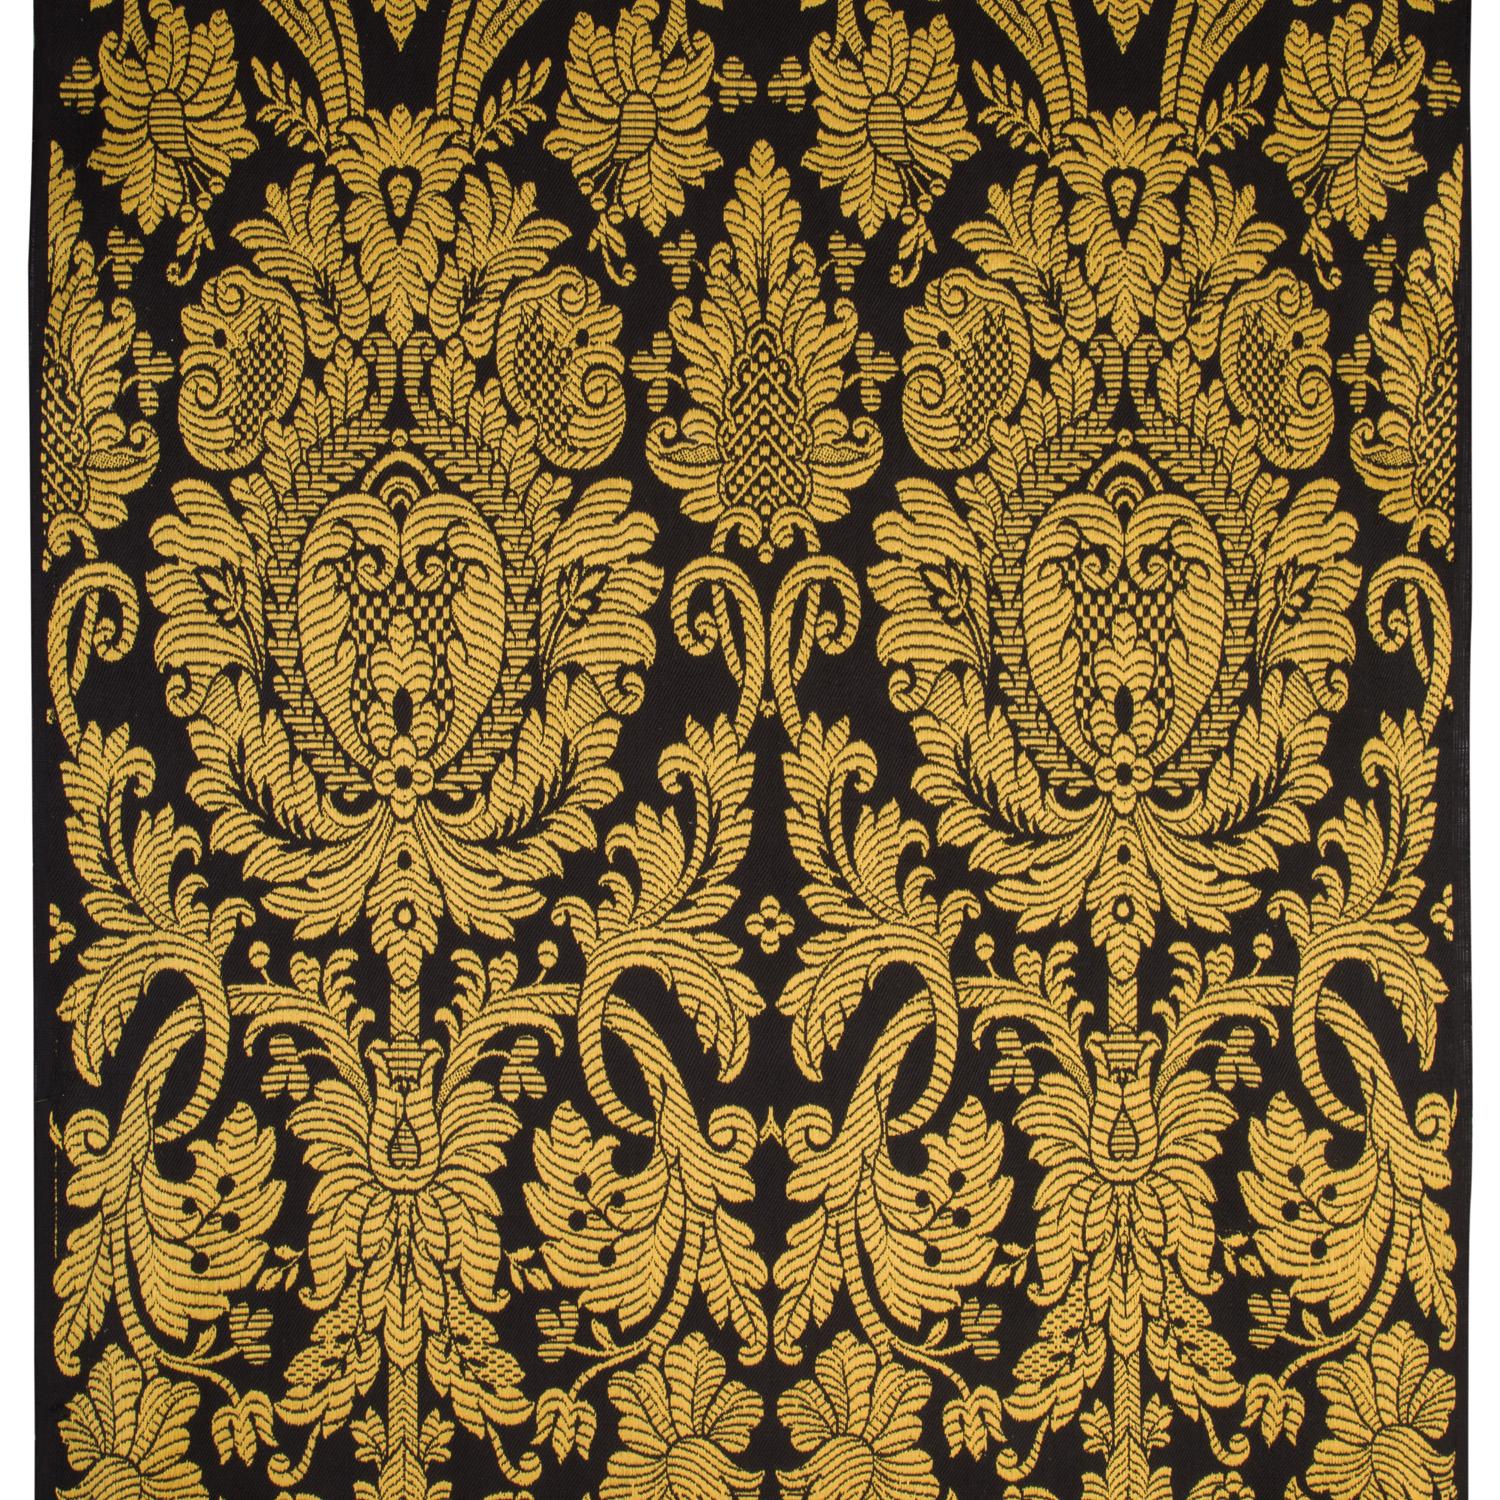 This is a handwoven brocade fabric. It is woven on an original hand loom from the 1700s. The Pio di Savoia pattern belongs to the Antico Setificio Fiorentino archives. This fabric can be used for all kinds of upholstery such as sofas, armchairs,